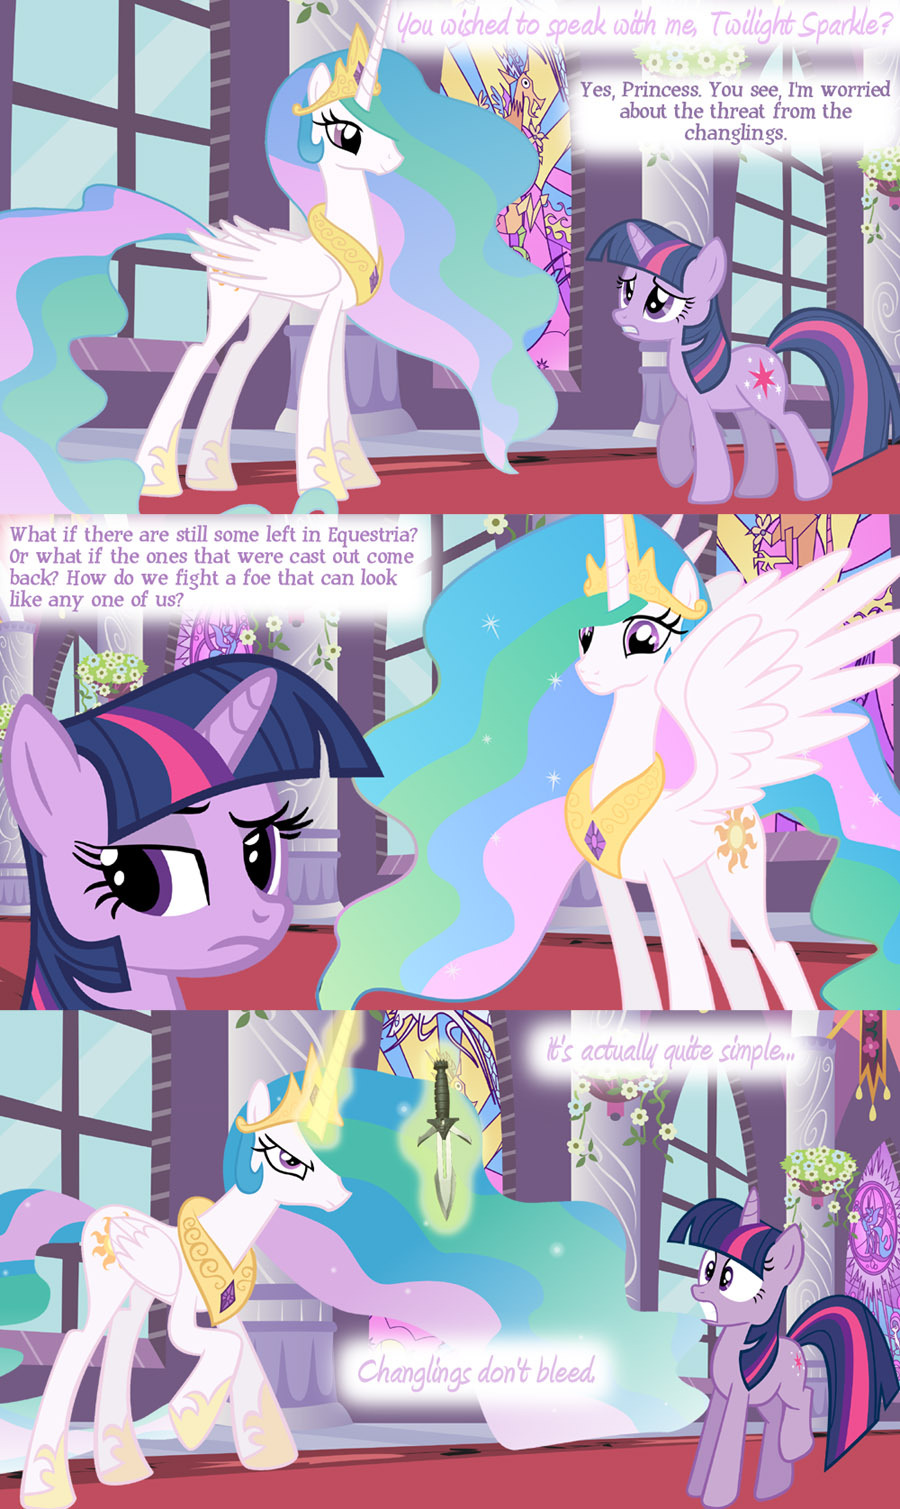 fisherpon:  framwinkle:  I think the Princess may have the wrong changelings in mind.